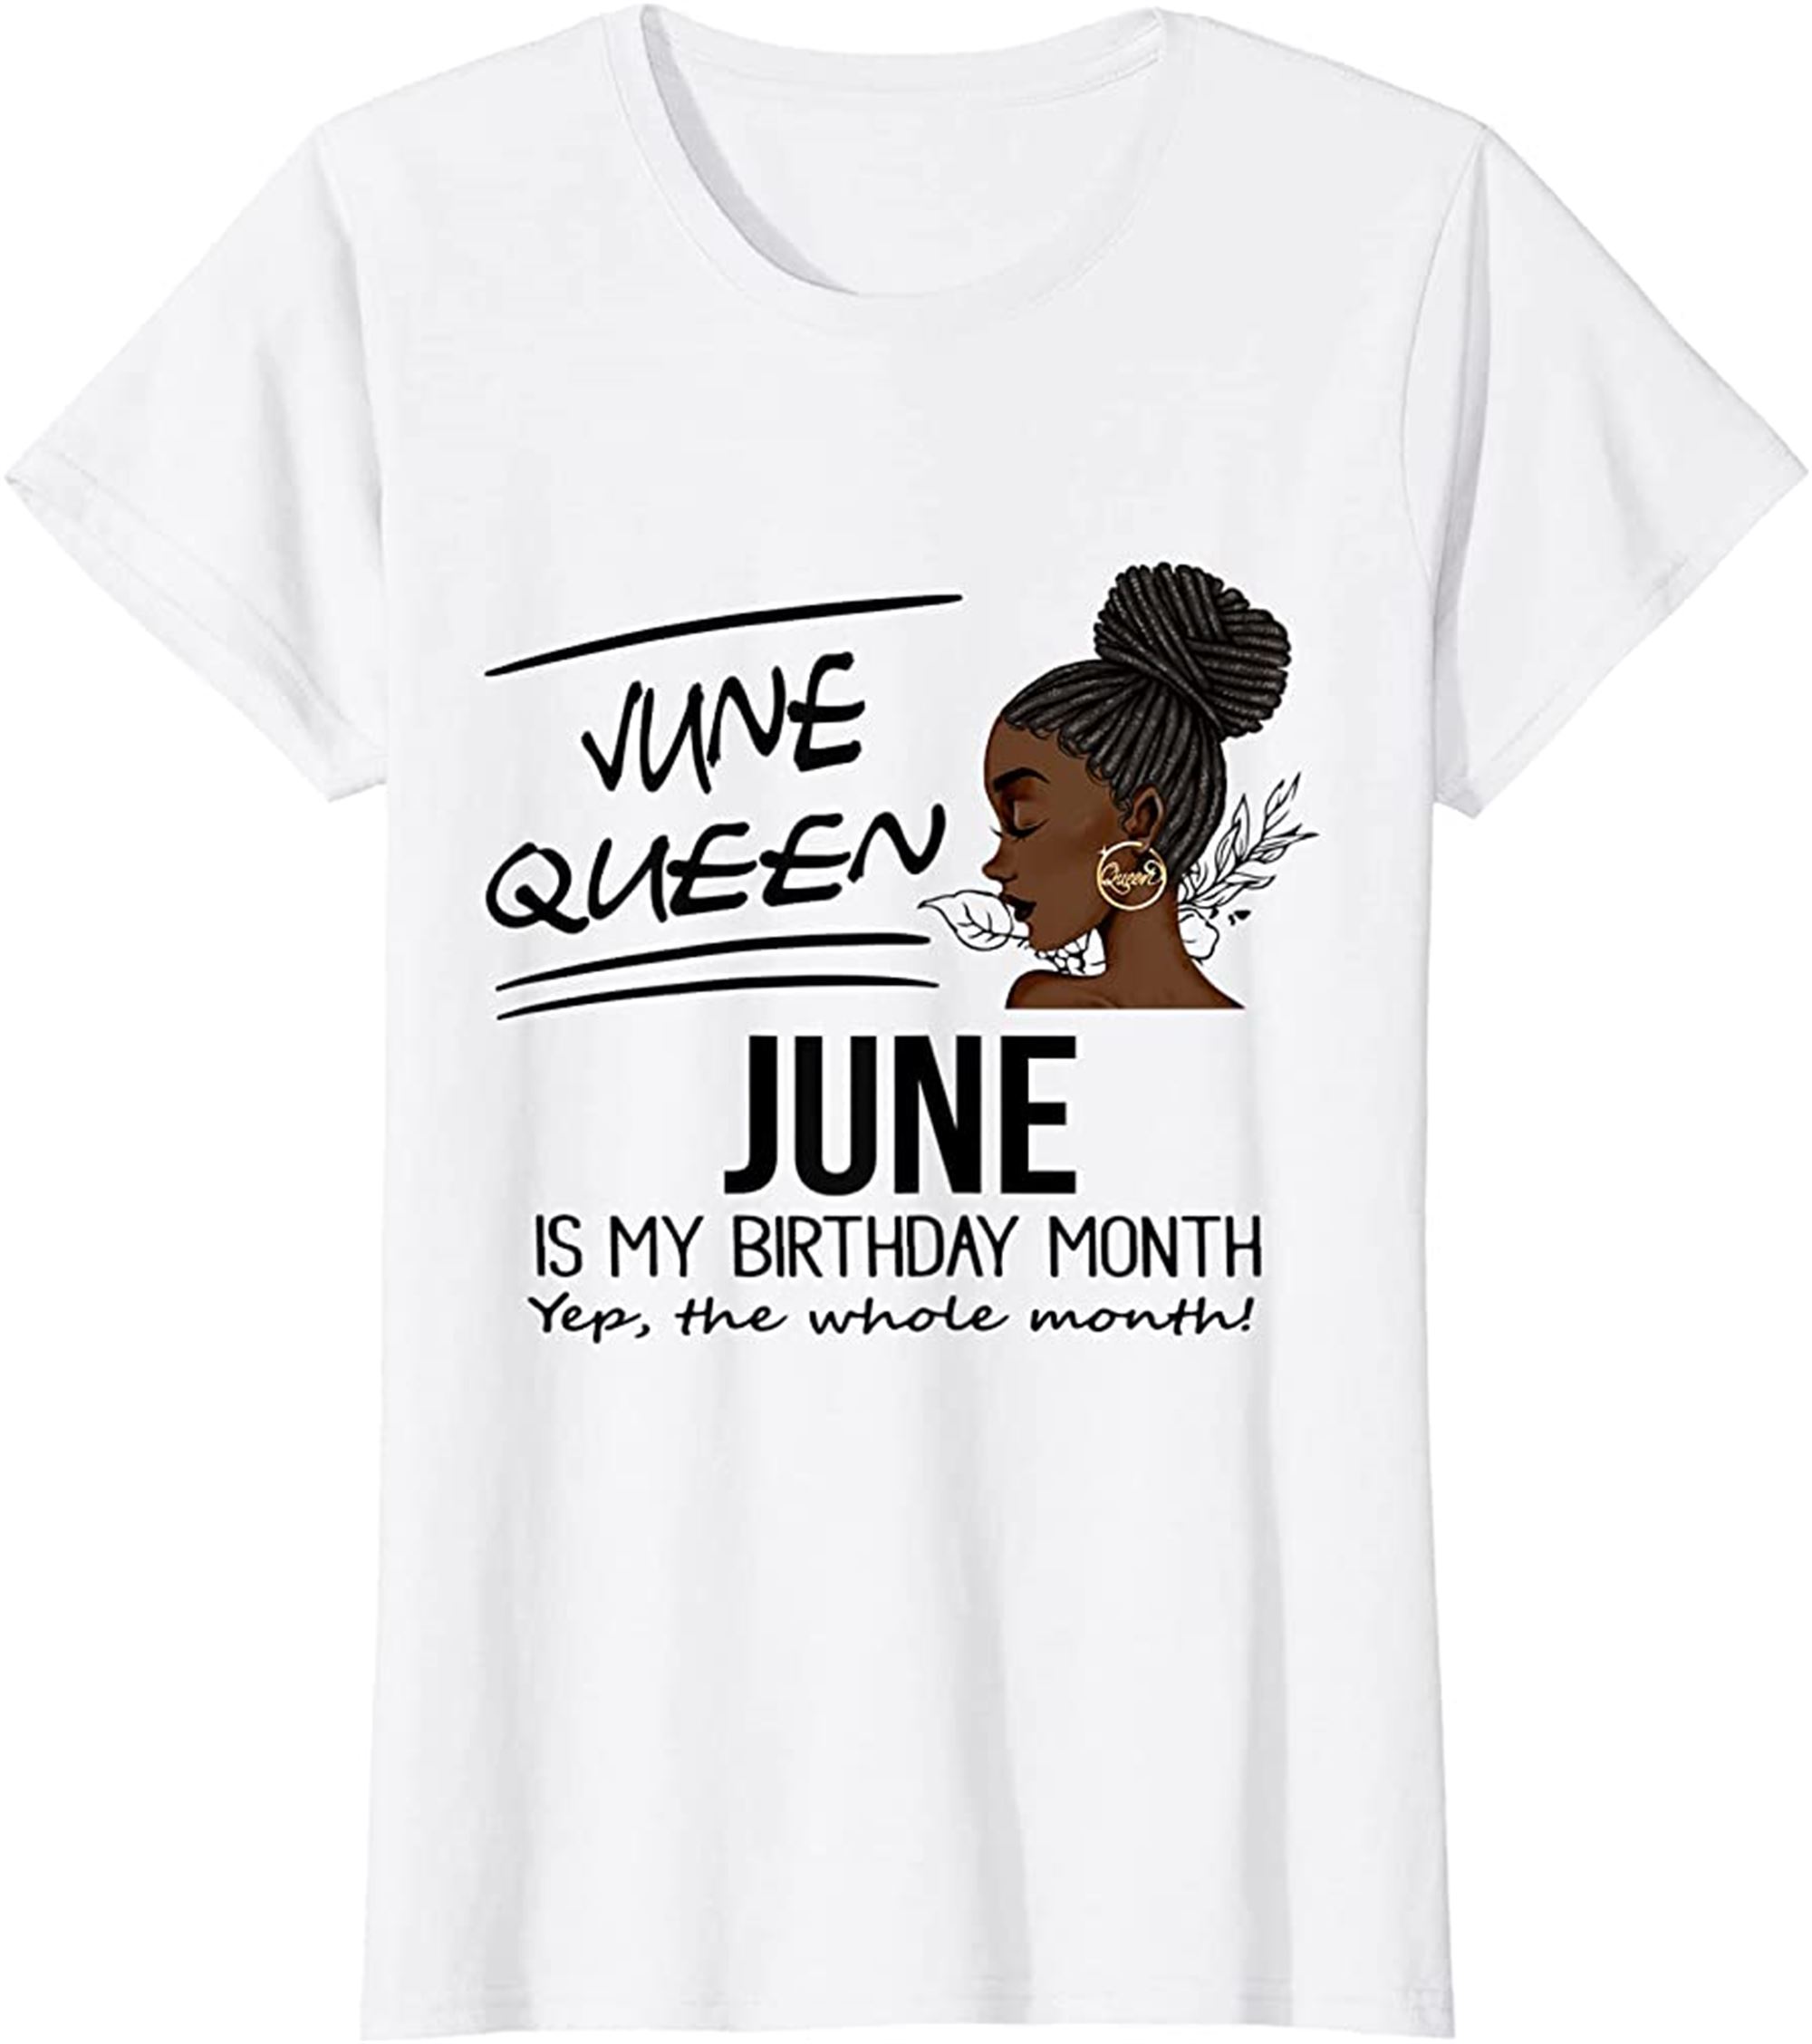 Womens June Queen June Is My Birthday Month Black Girl T-shirt Size Up To 5xl